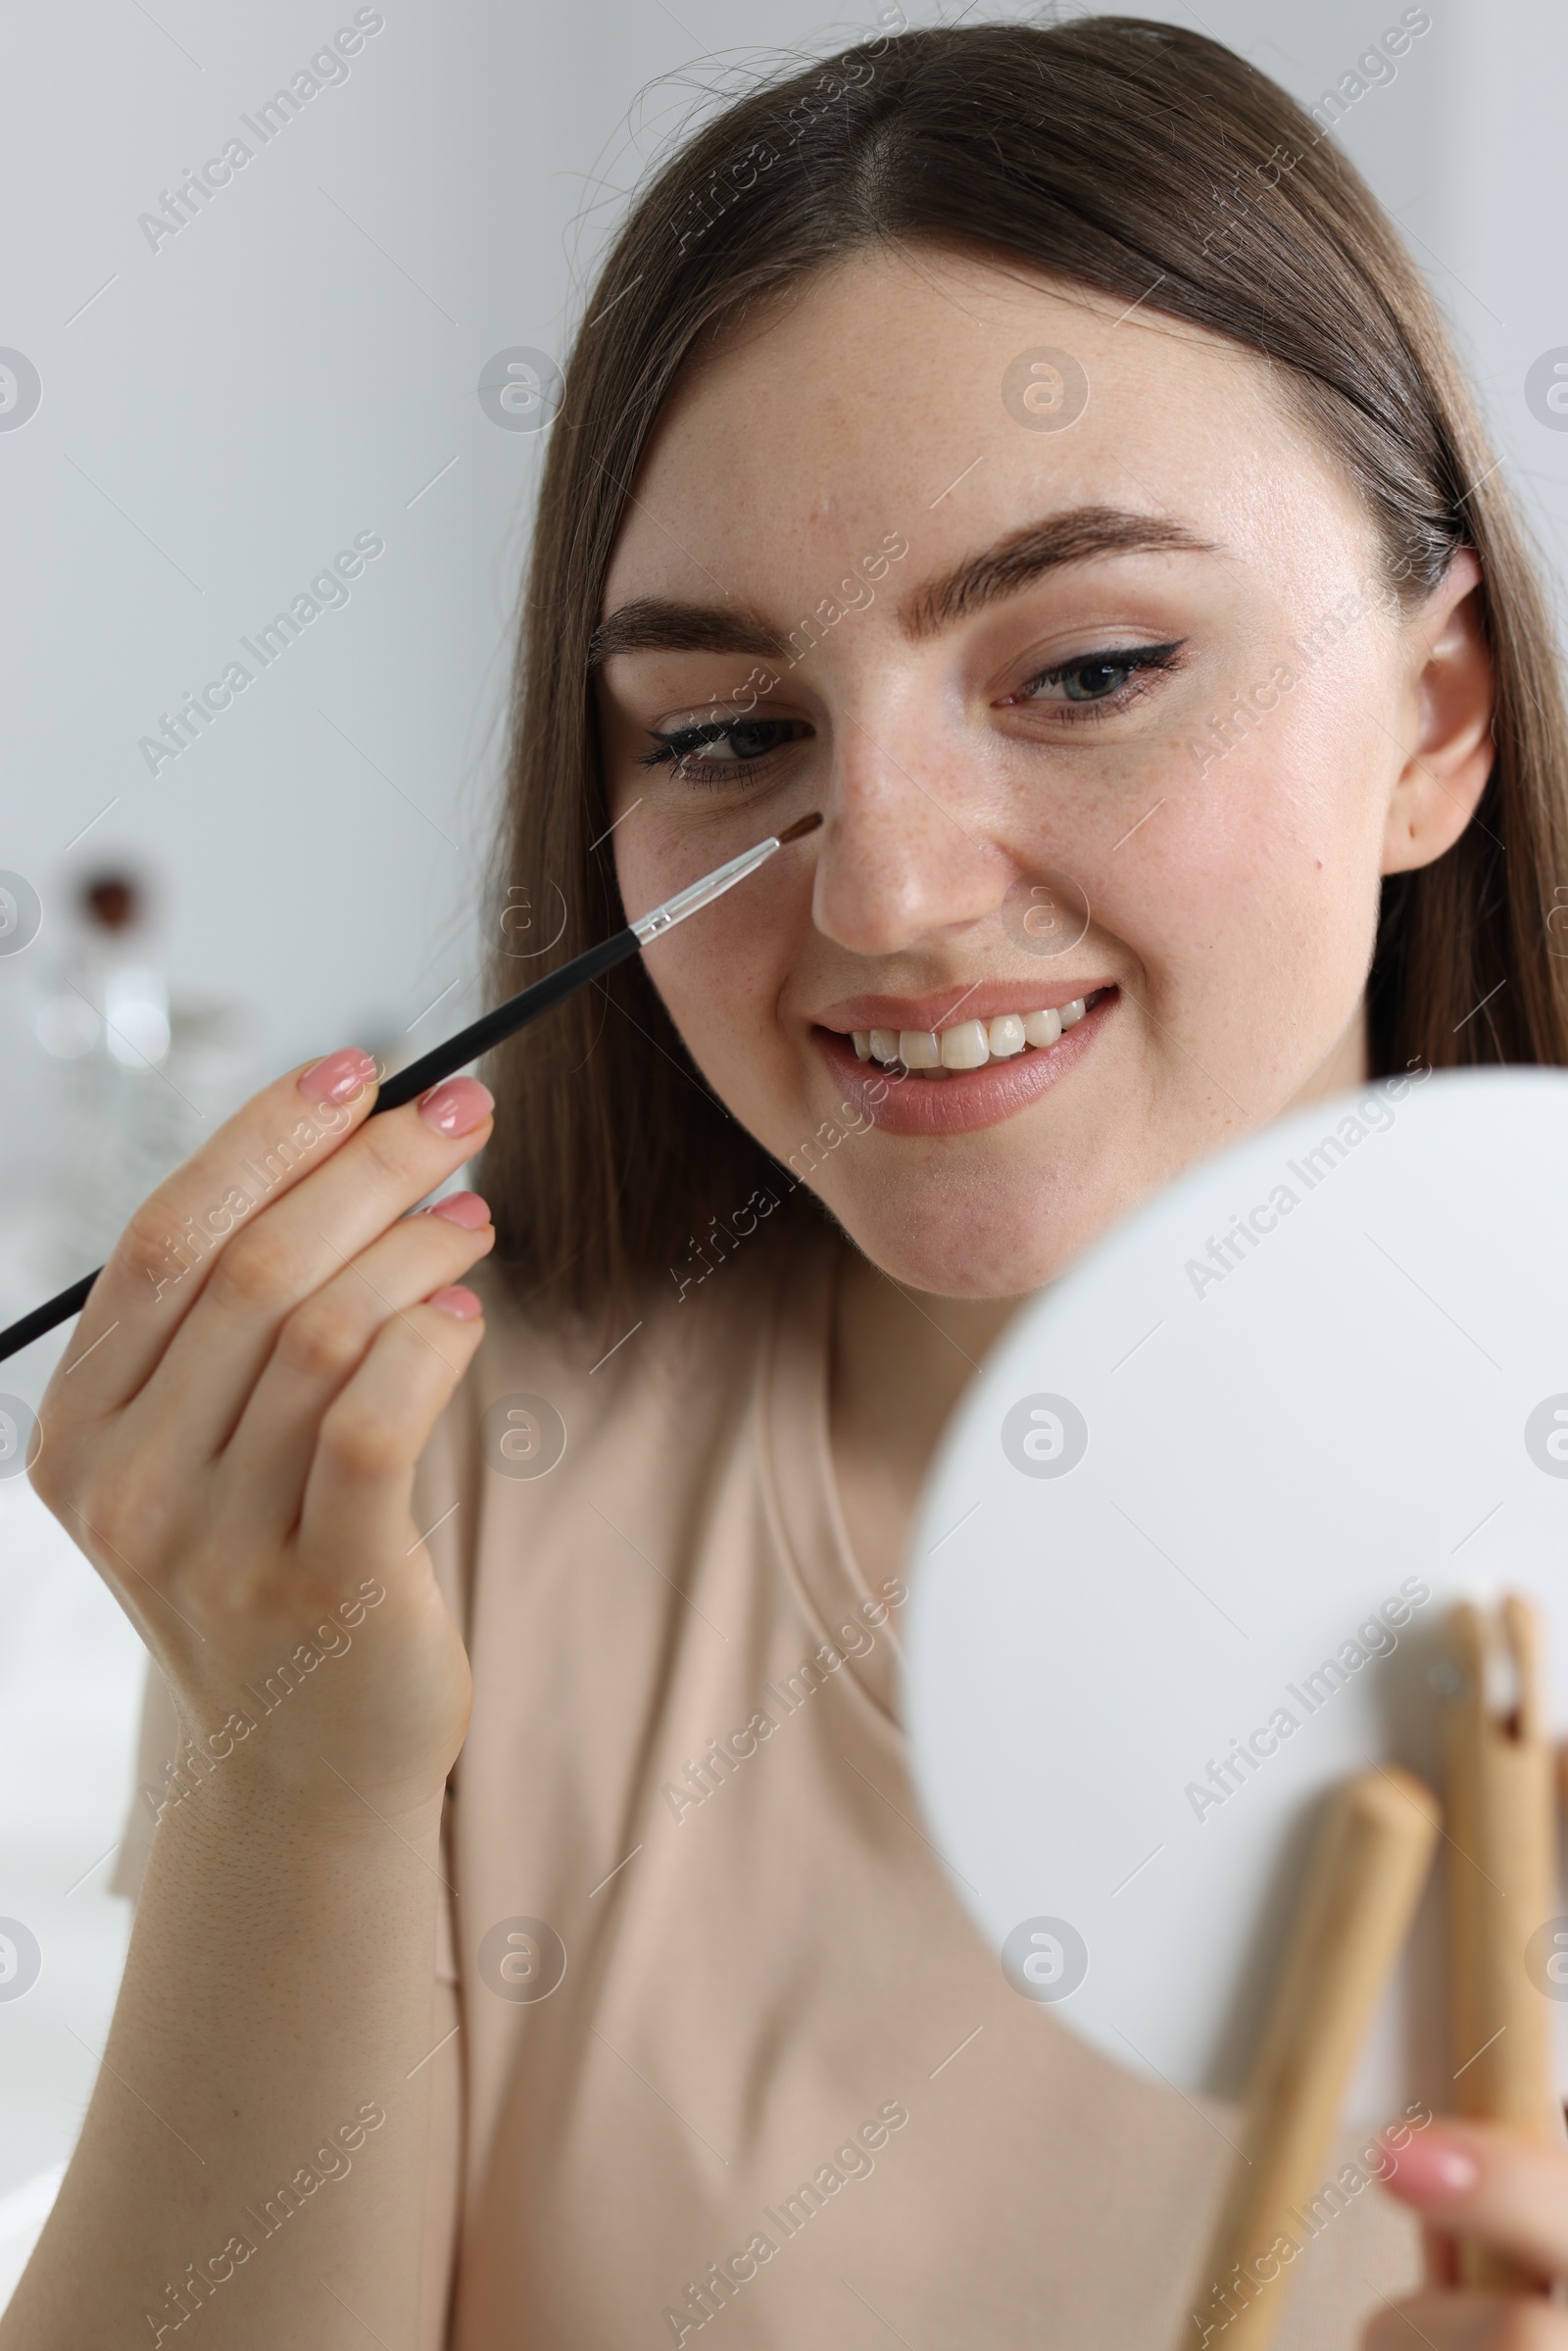 Photo of Smiling woman drawing freckles with brush indoors